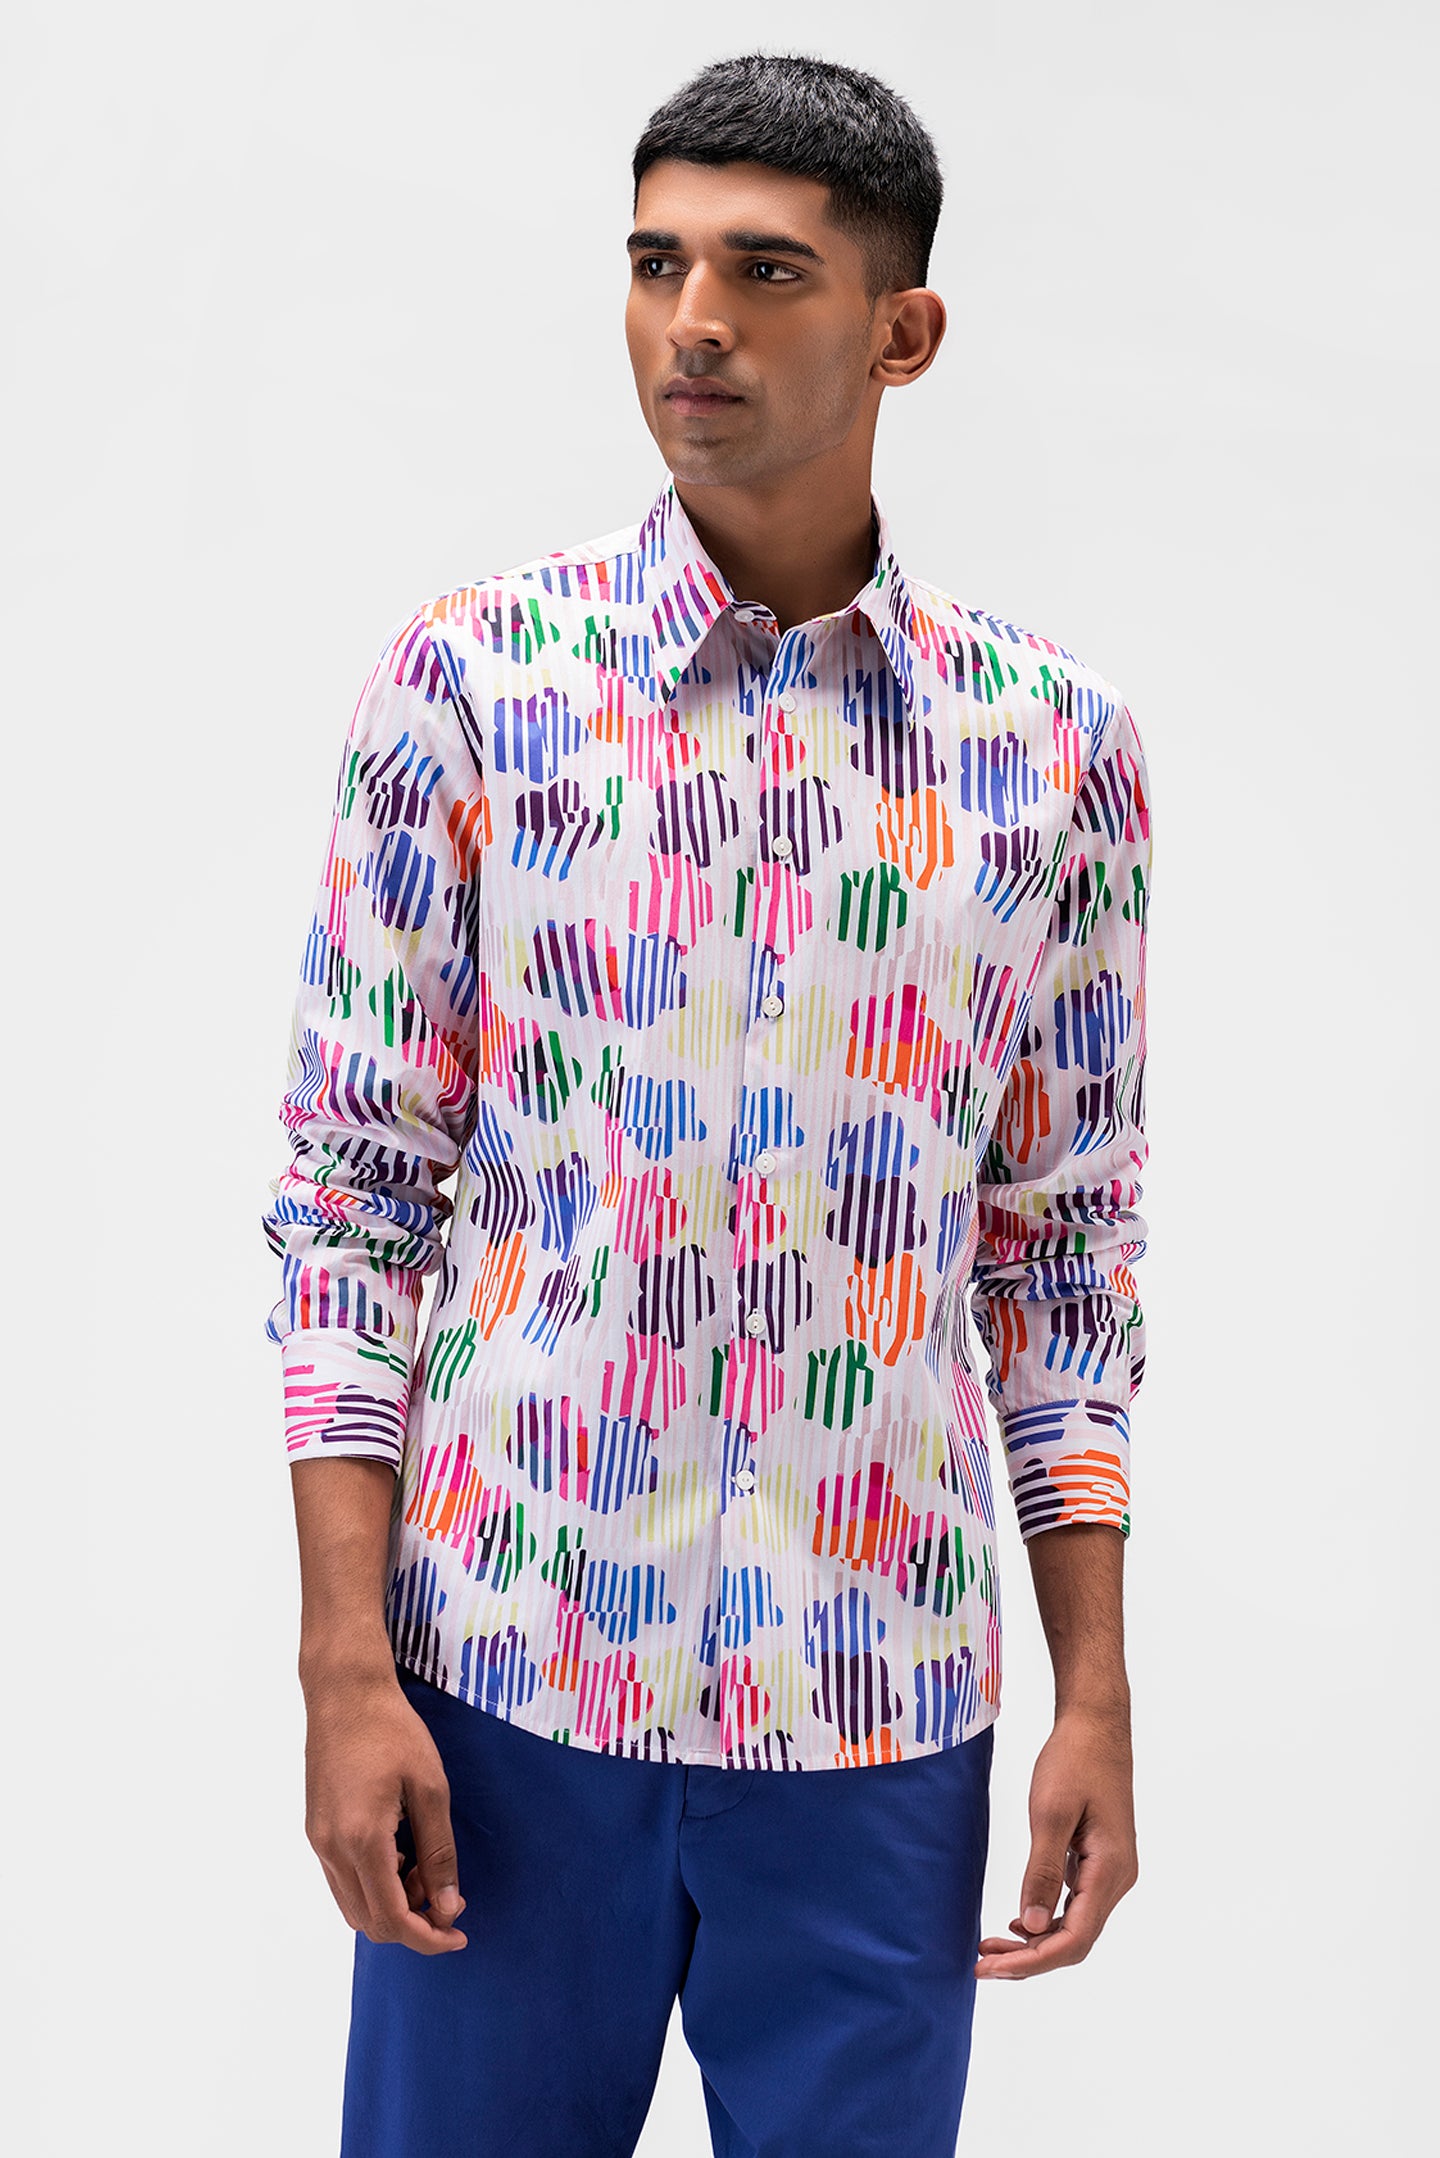 Multicolored Floral Collage Mens Shirt